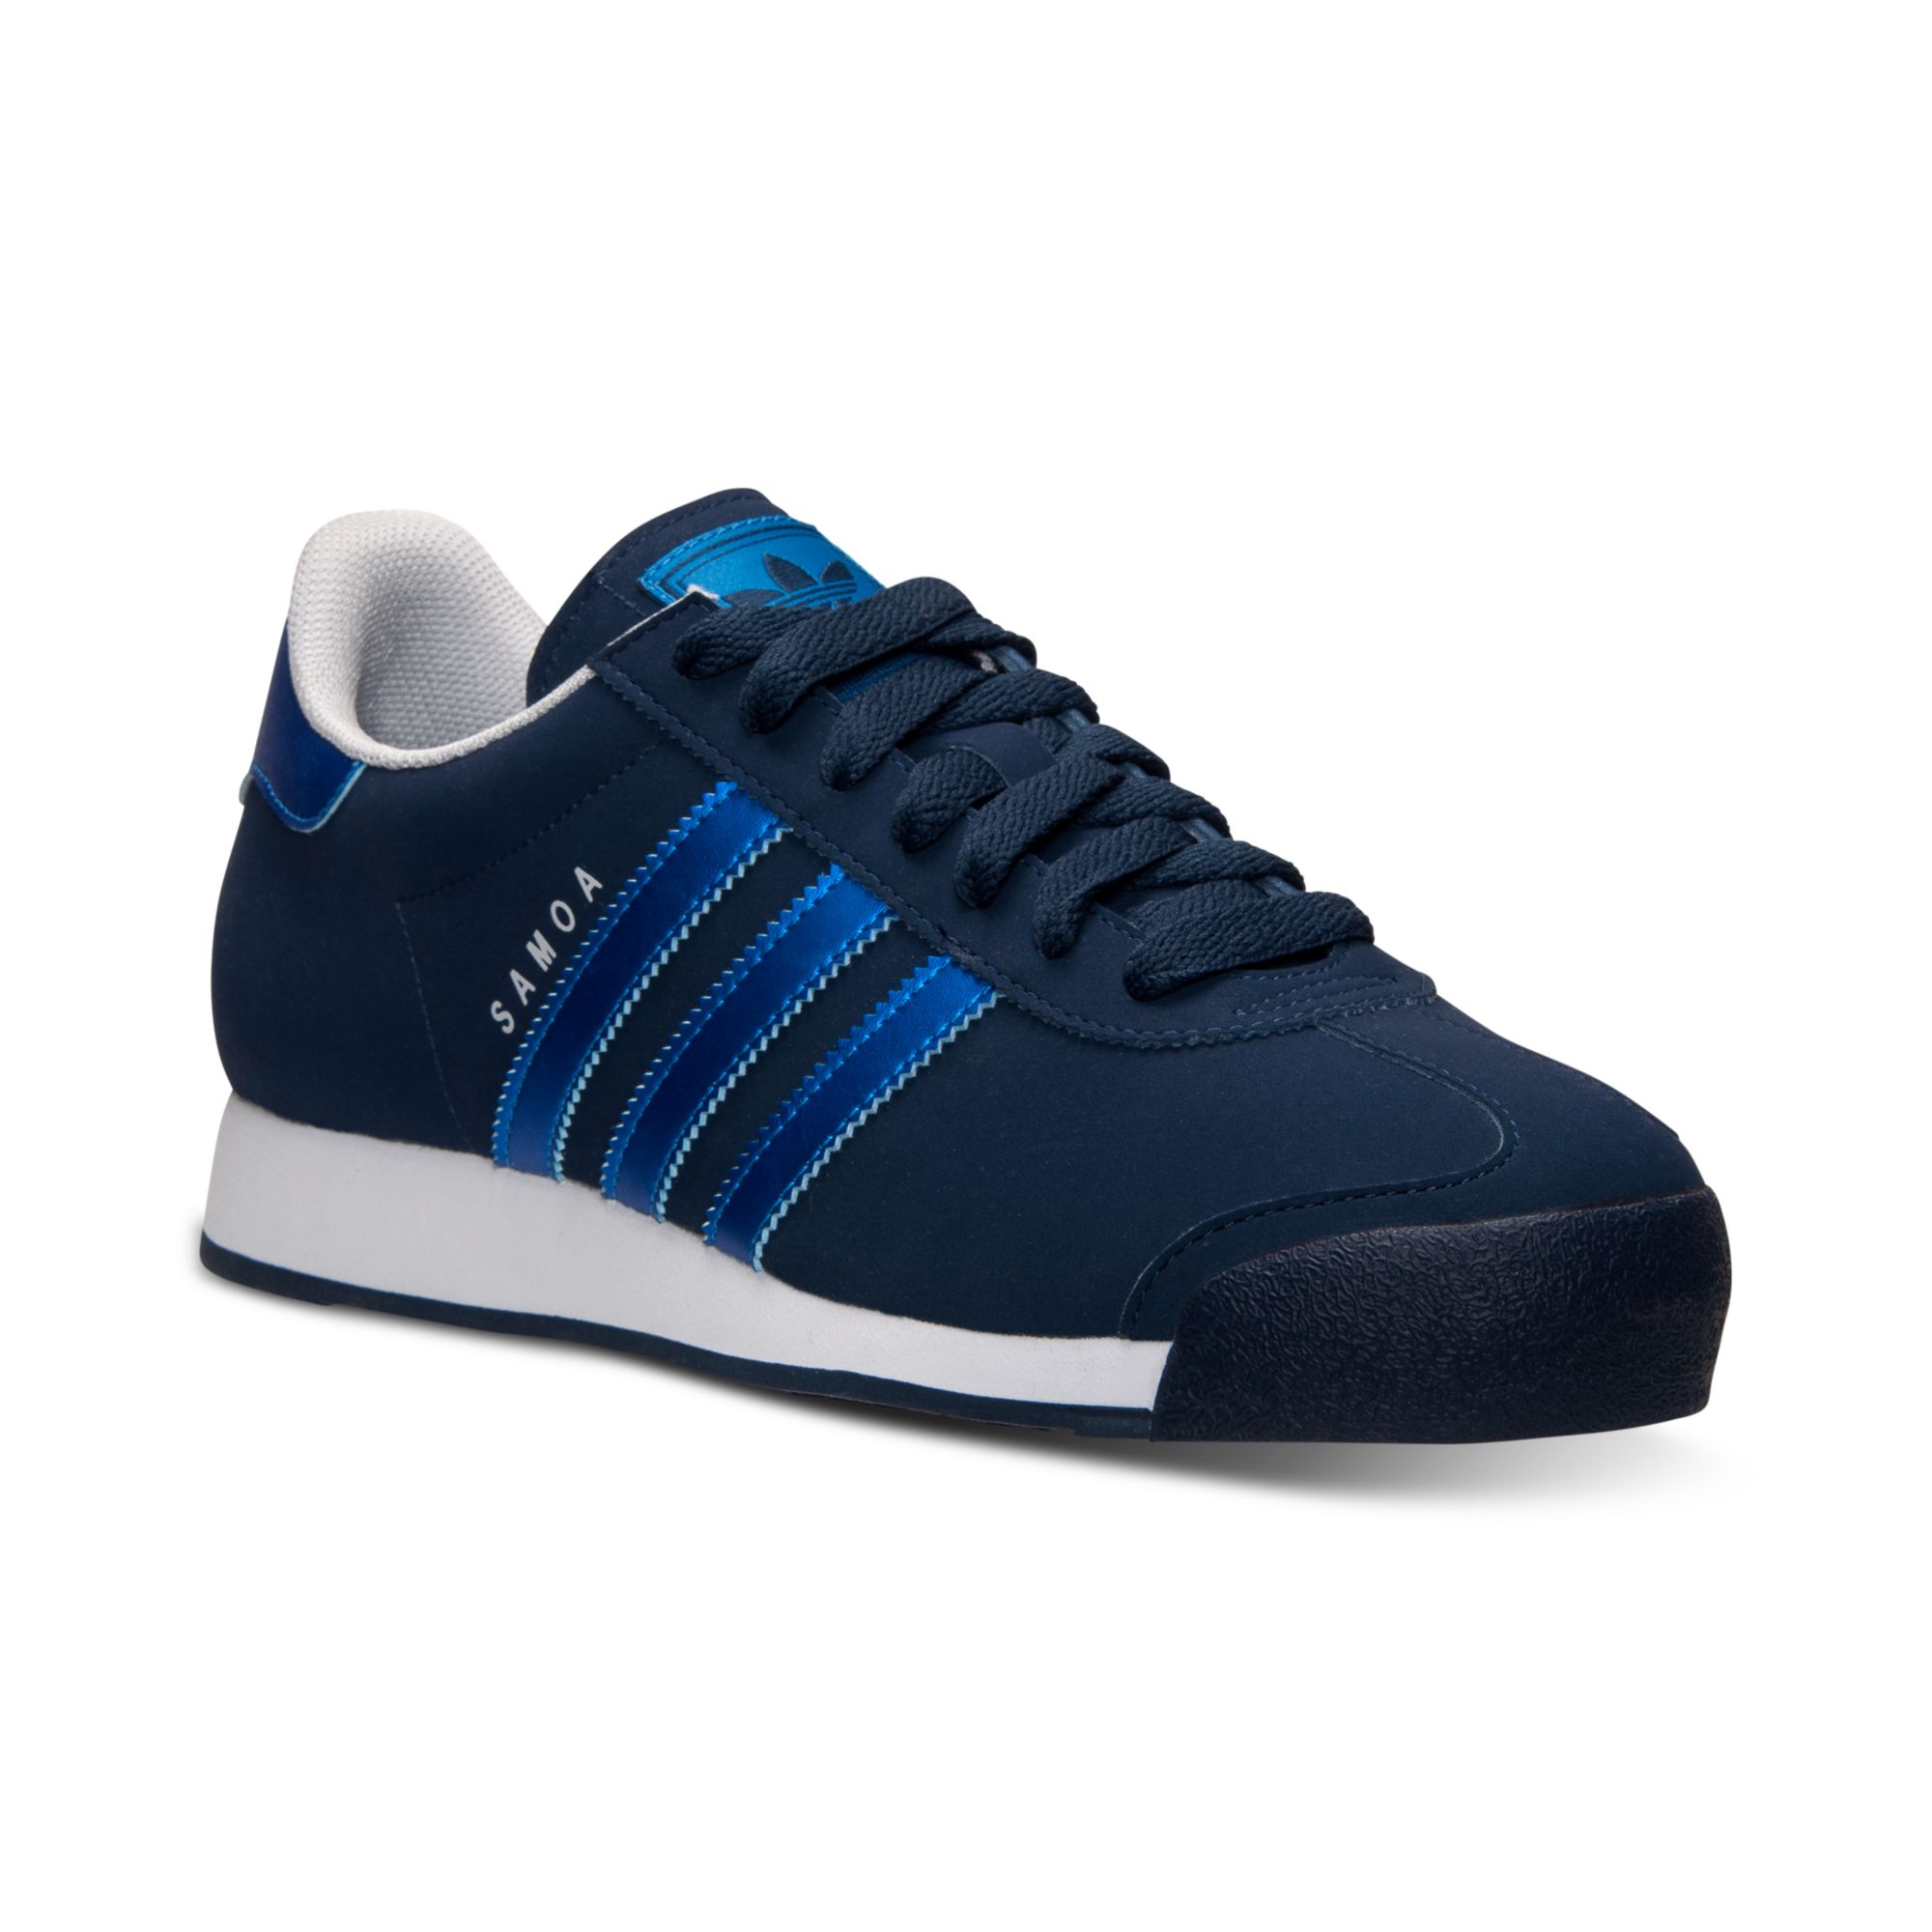 Lyst - Adidas Men'S Samoa Casual Sneakers From Finish Line in Blue for Men